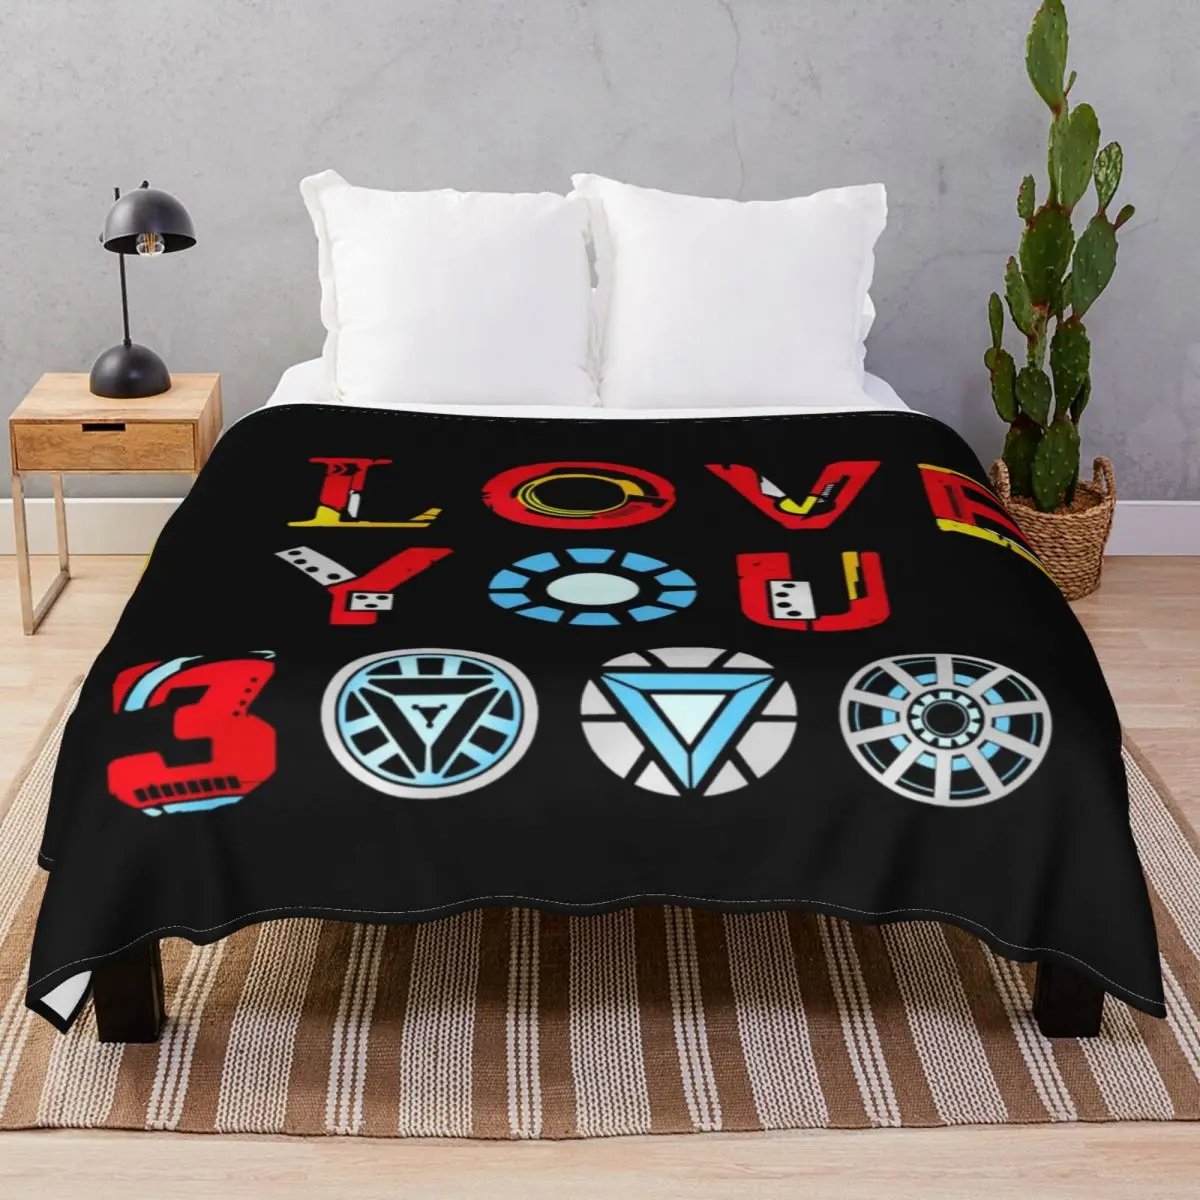 I Love You 3000 V3 Blanket Flannel Spring/Autumn Ultra-Soft Throw Blankets for Bed Sofa Travel Office